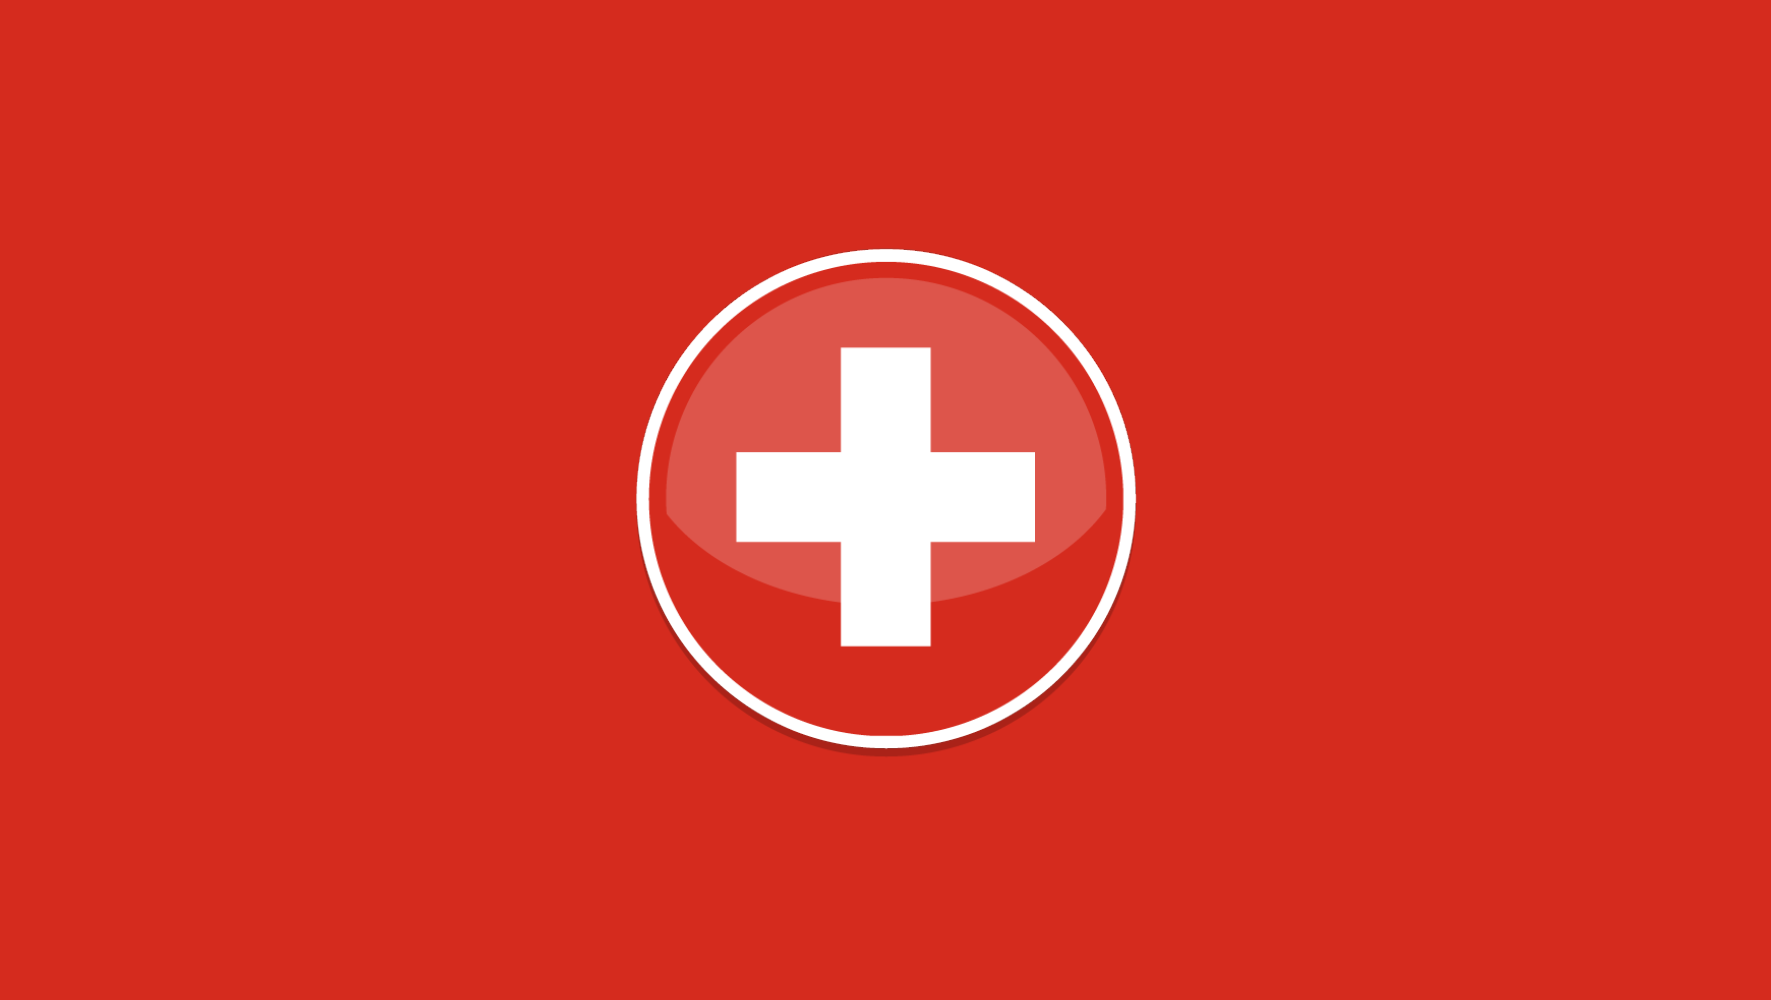 Swiss Sanctions: Measures in connection with the situation in Ukraine